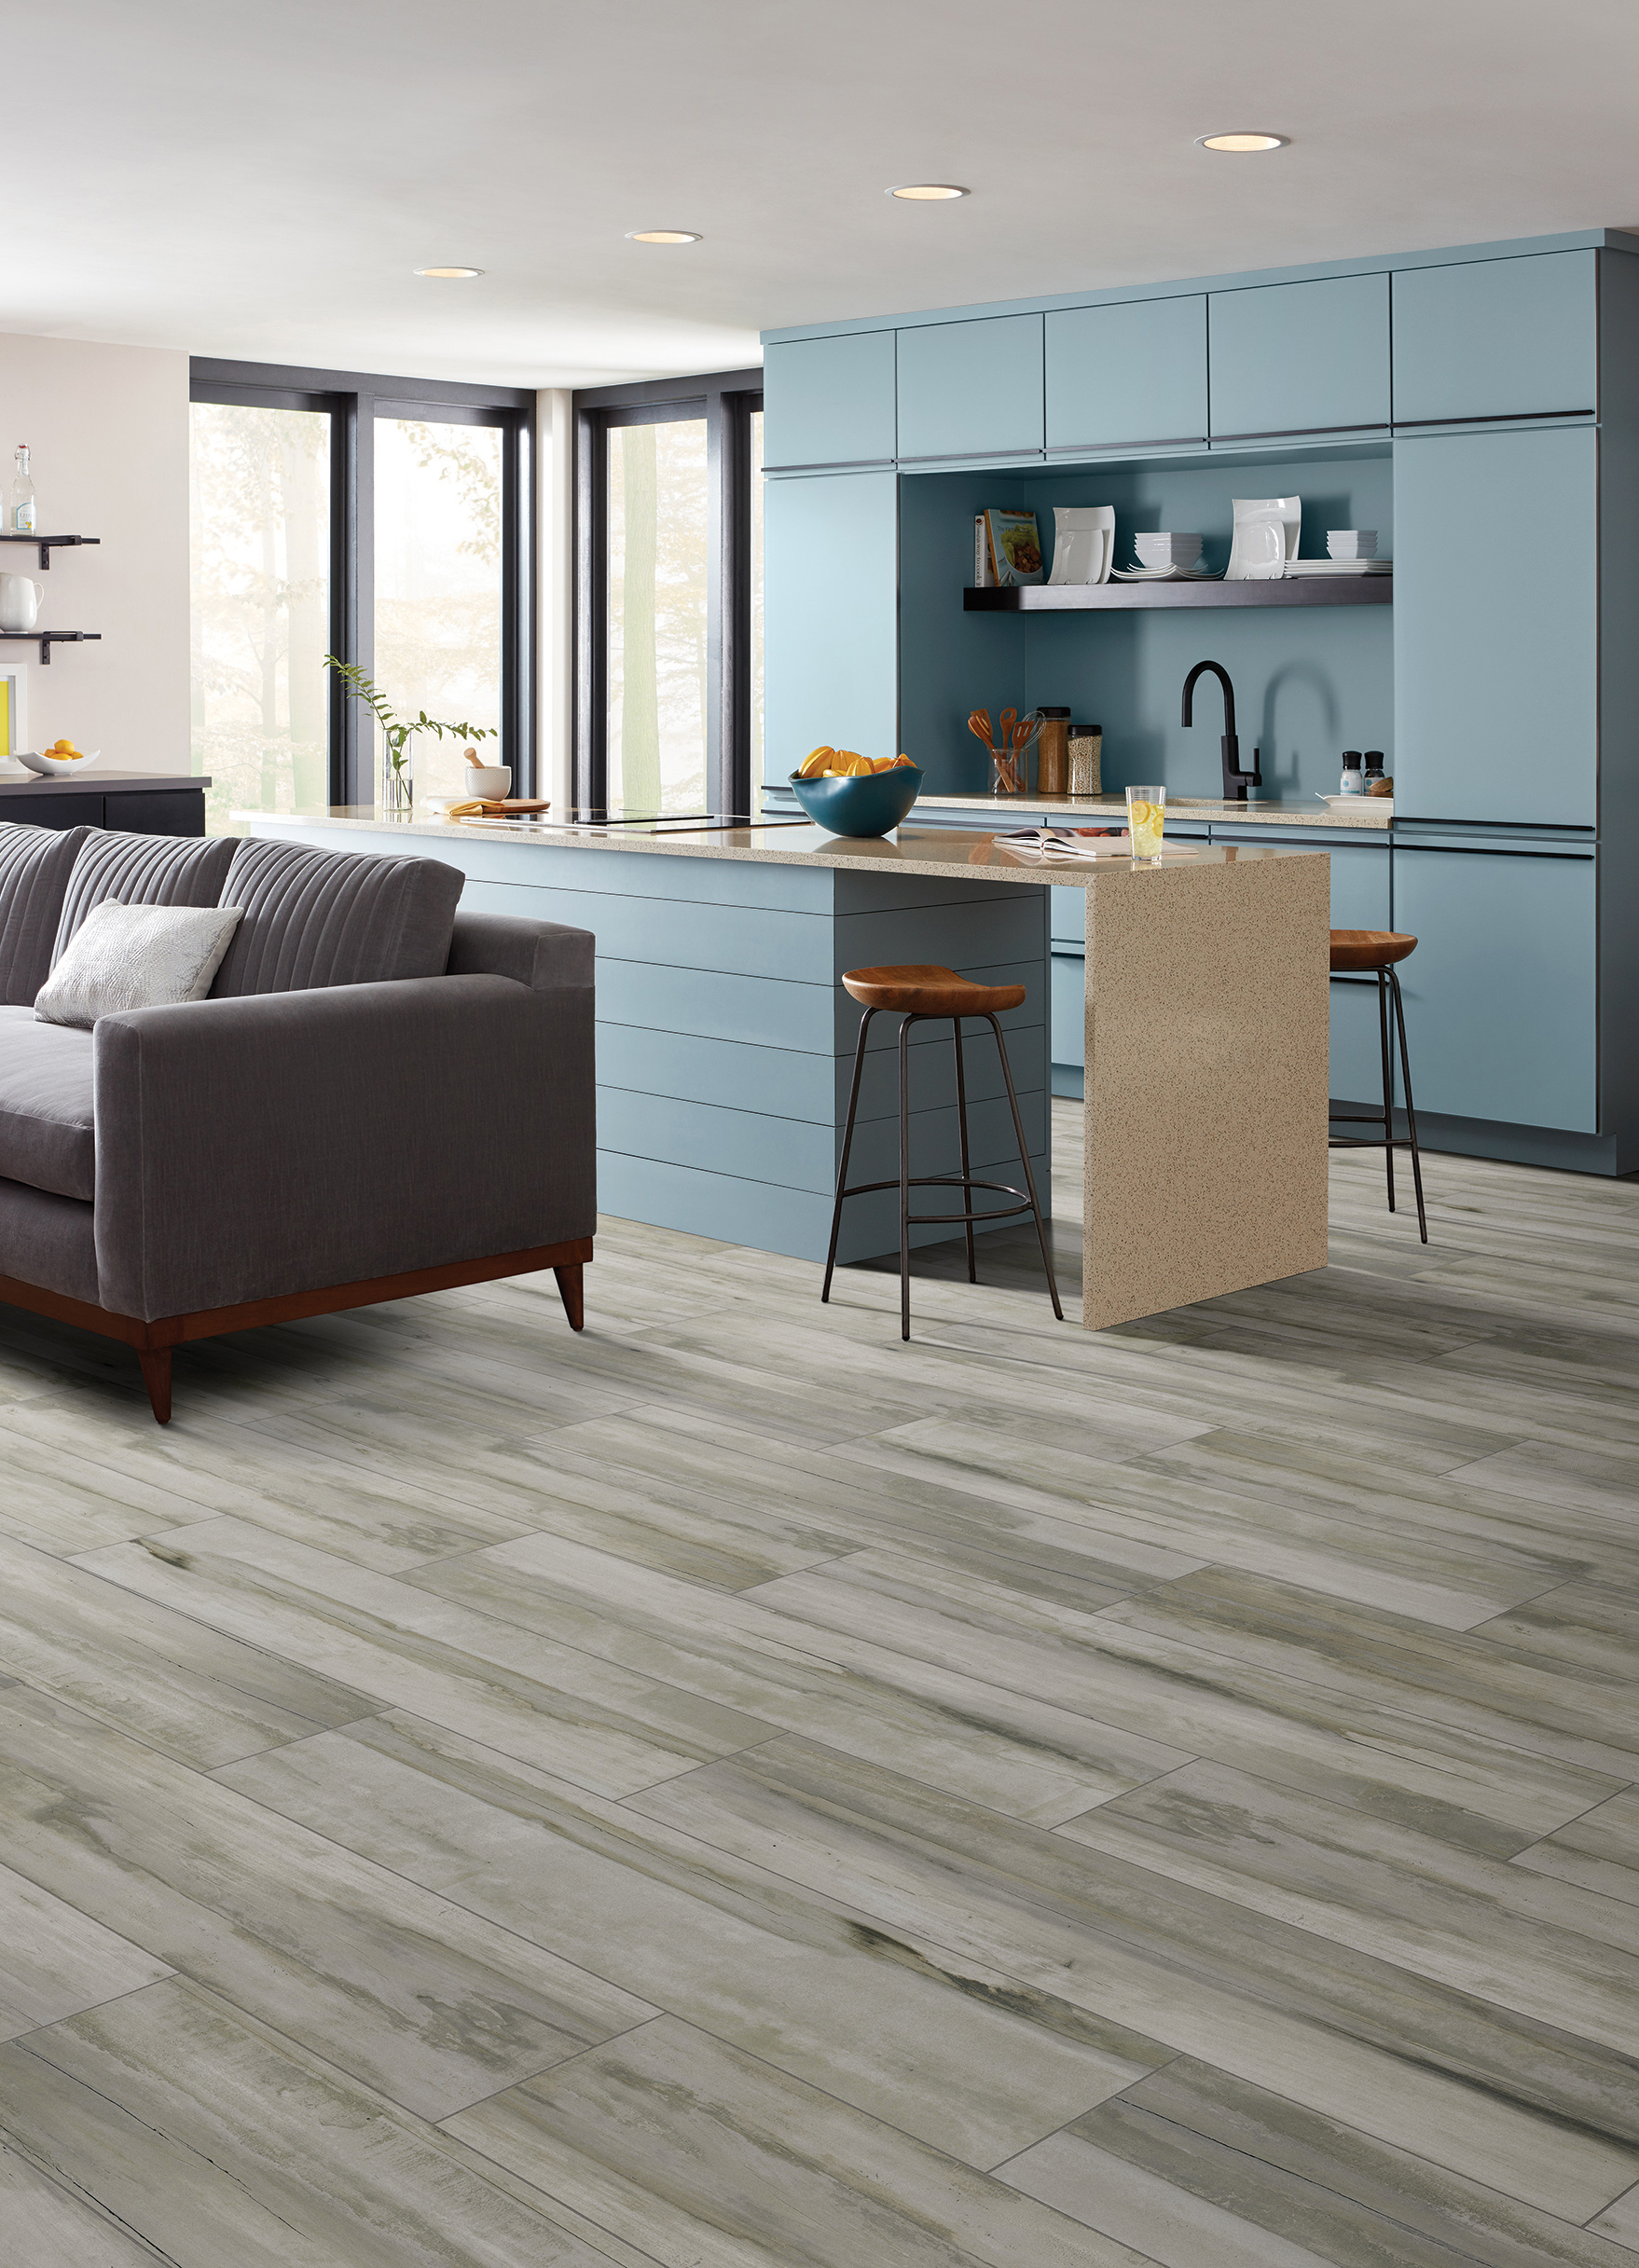 Arcadian Scene wood-look tile featuring baby blue kitchen cabinetry, island and couch in an open concept living/kitchen space